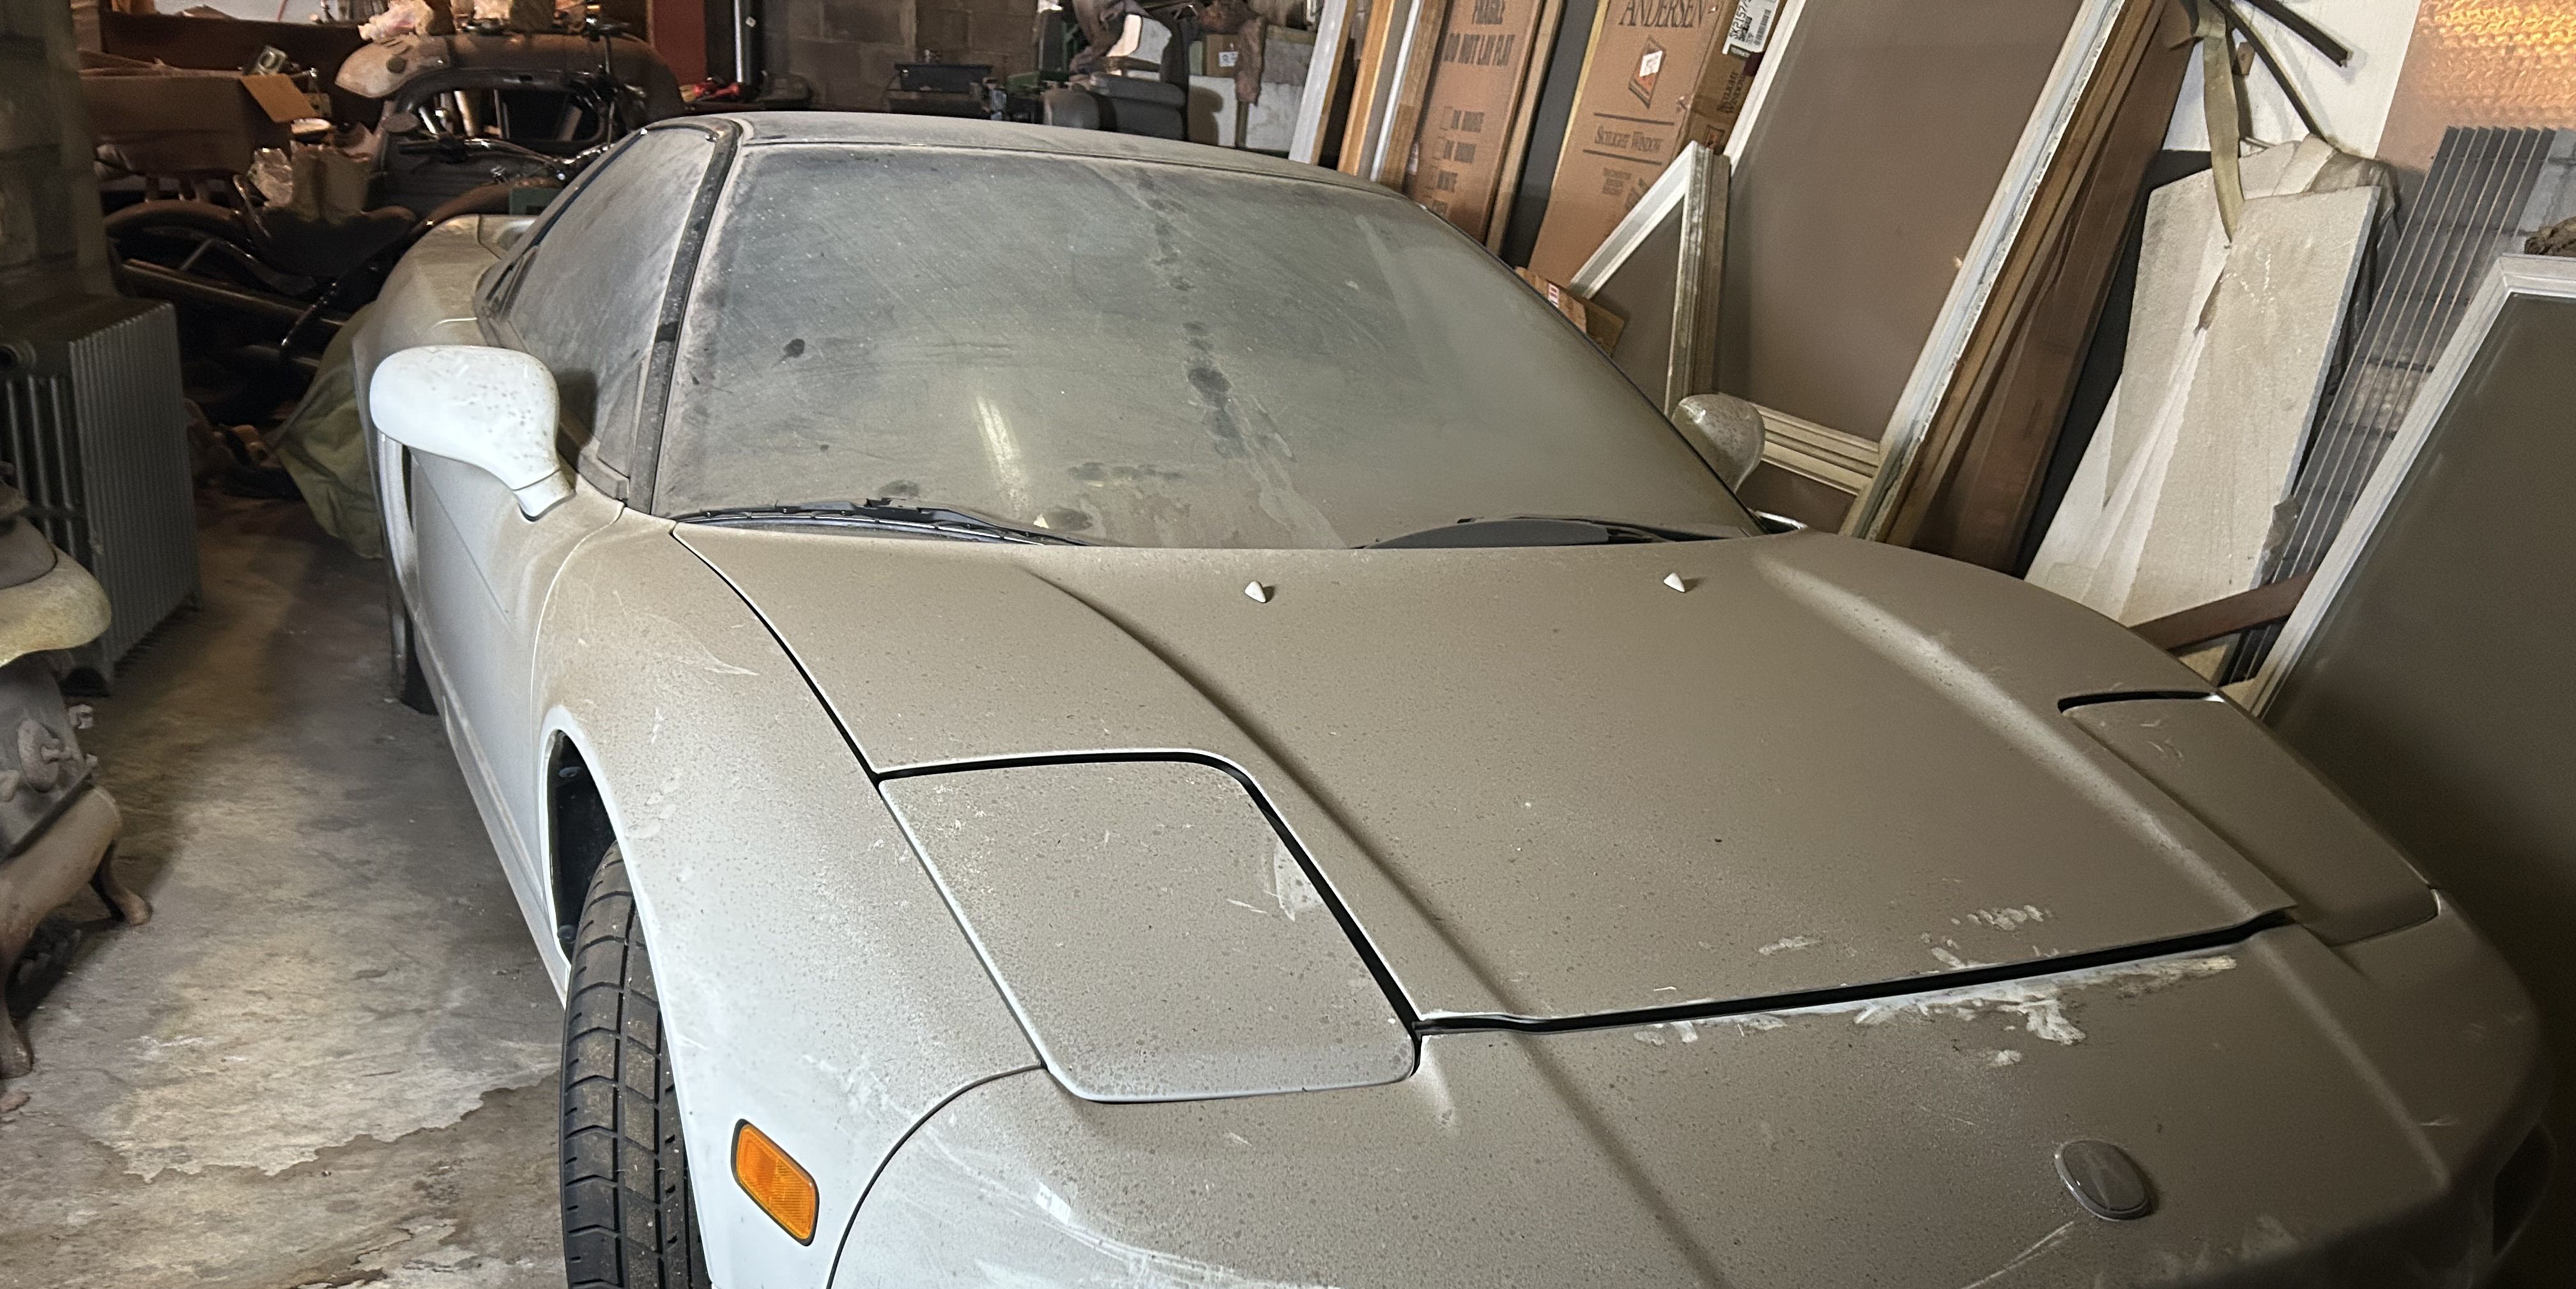 1992 Acura NSX Barn Find Emerges with Only 2,000 Miles on the Clock